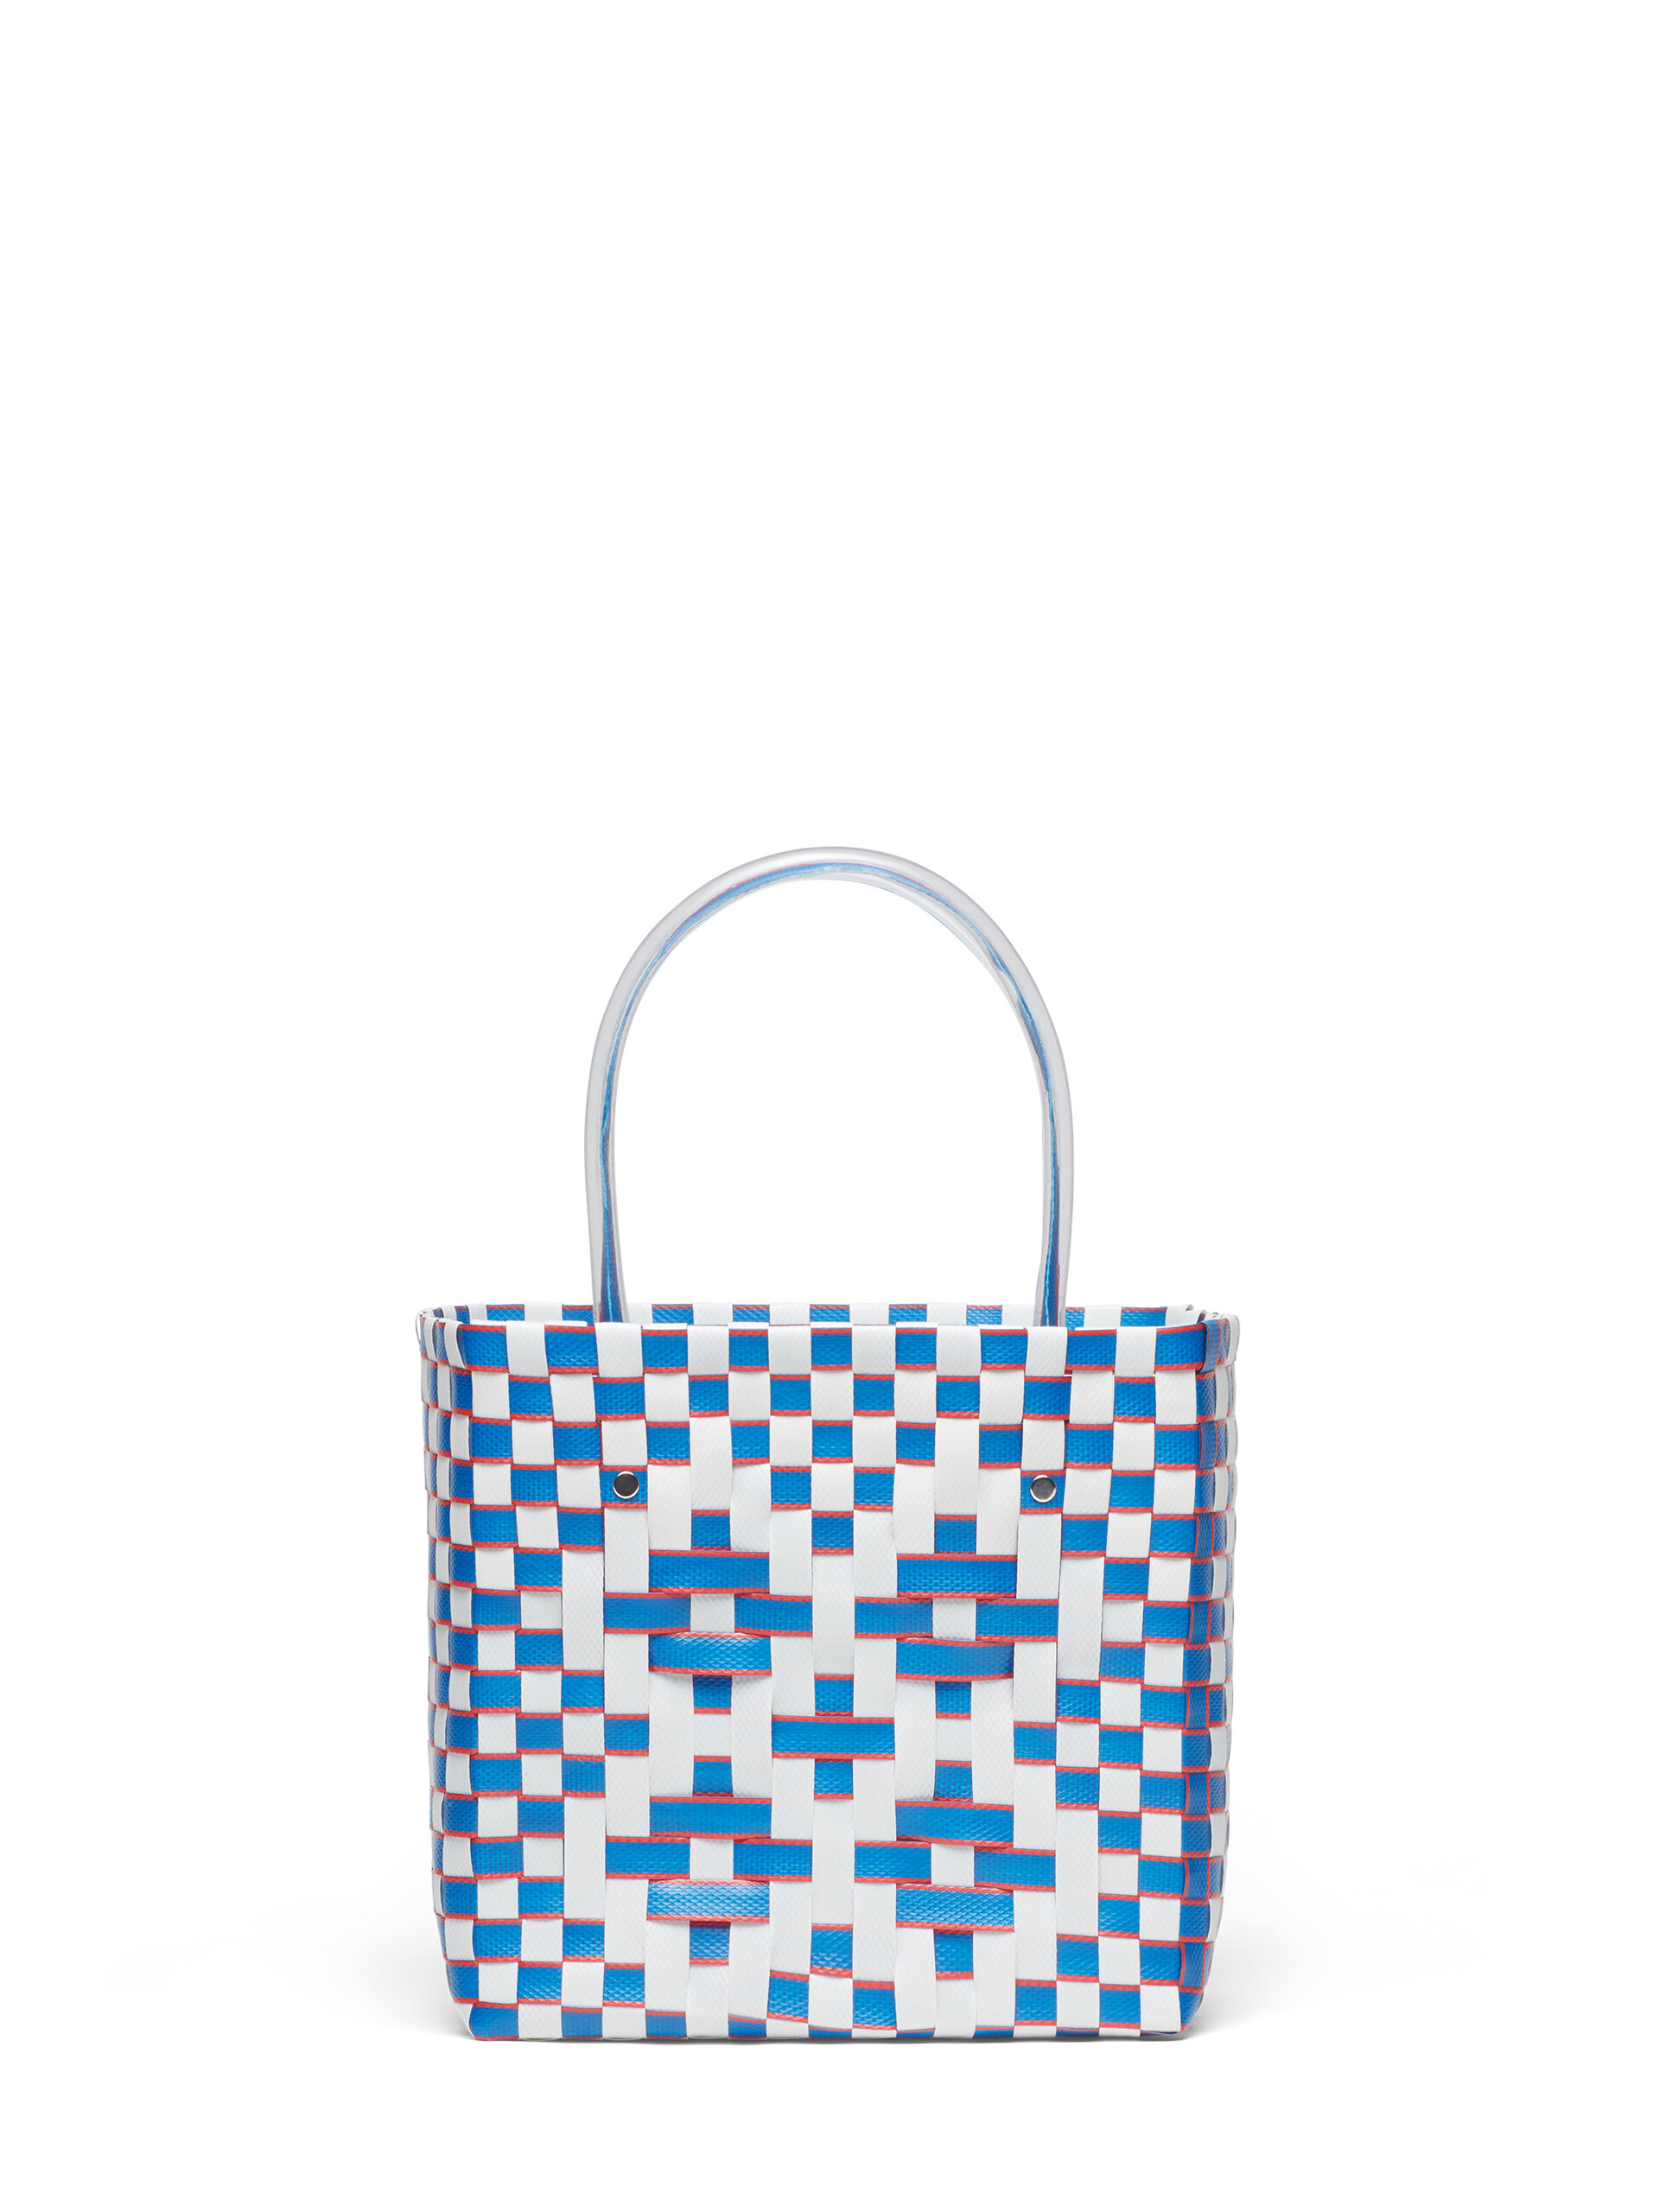 MARNI MARKET BASKET bag in white and pale blue woven material - Bags - Image 3